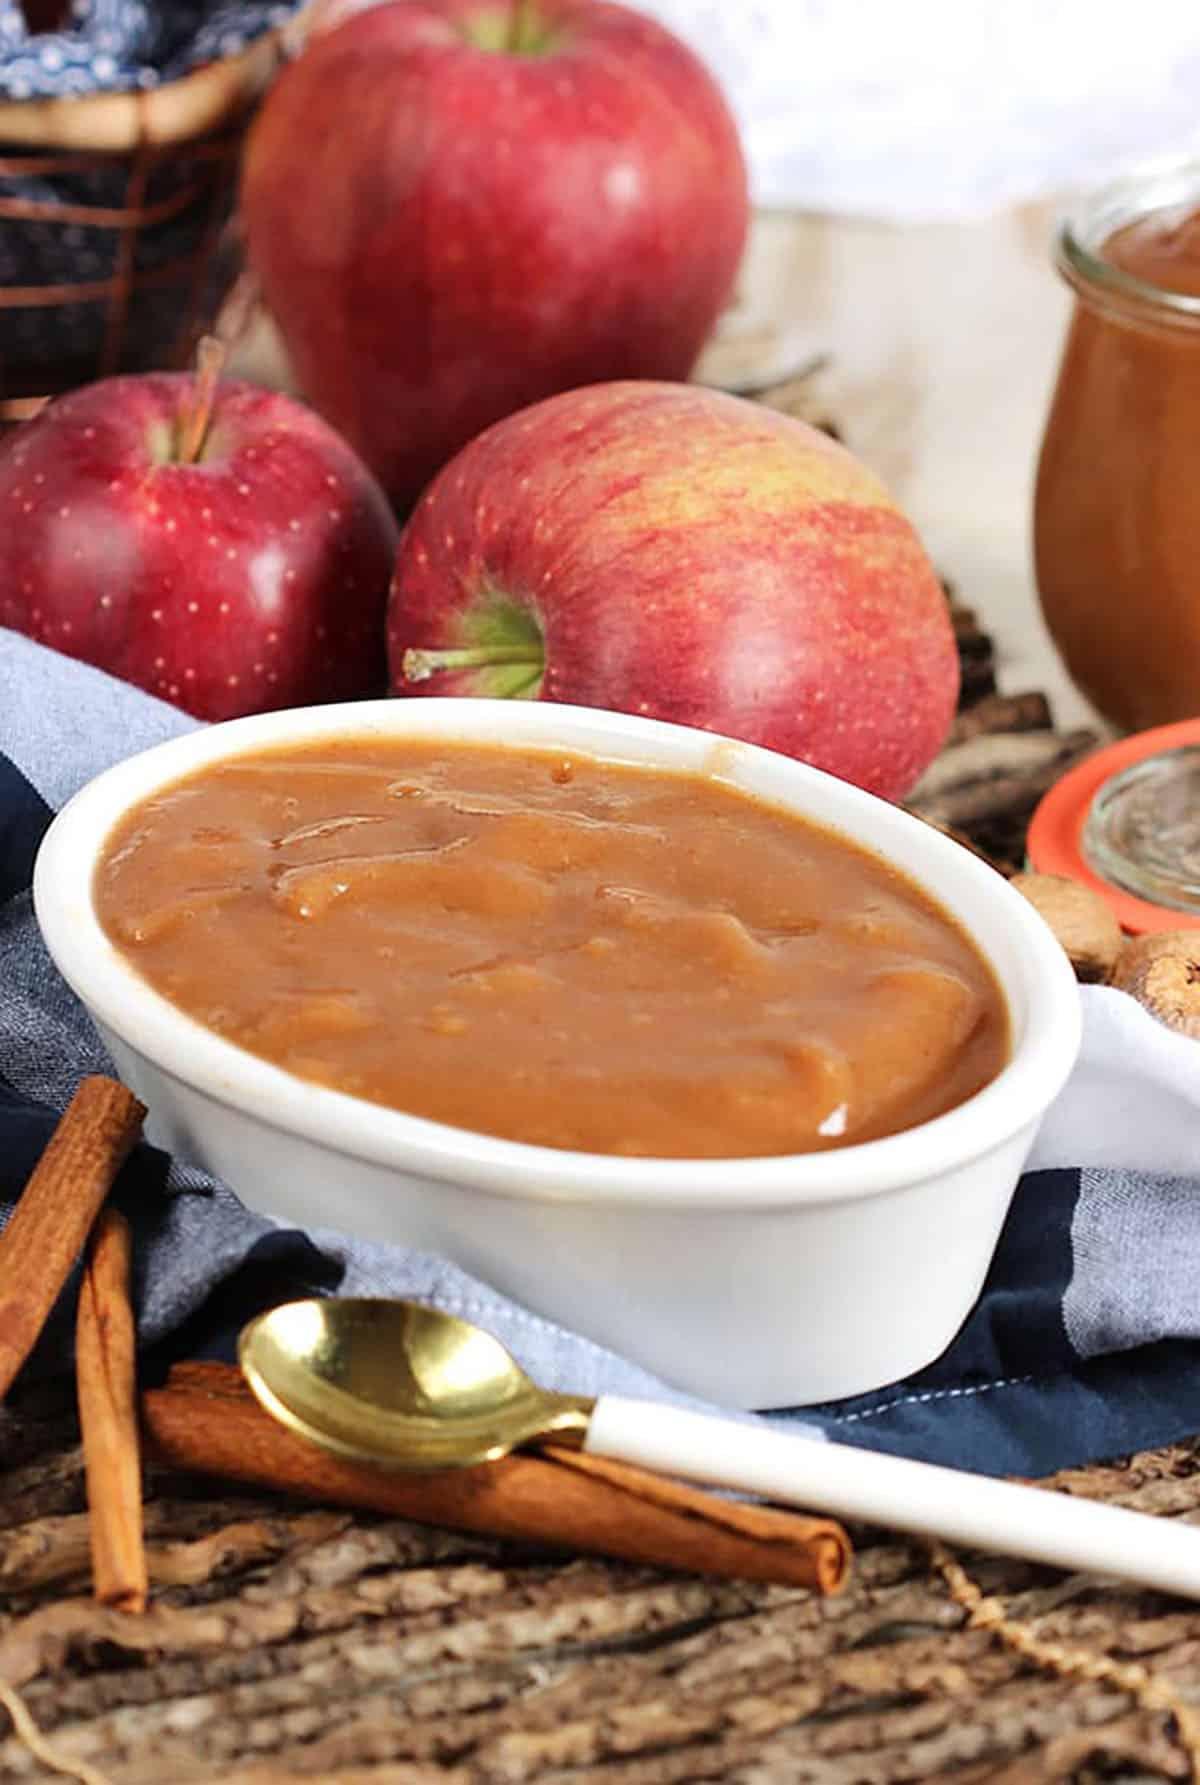 Apple butter in a white oval bowl on a twig placemat.